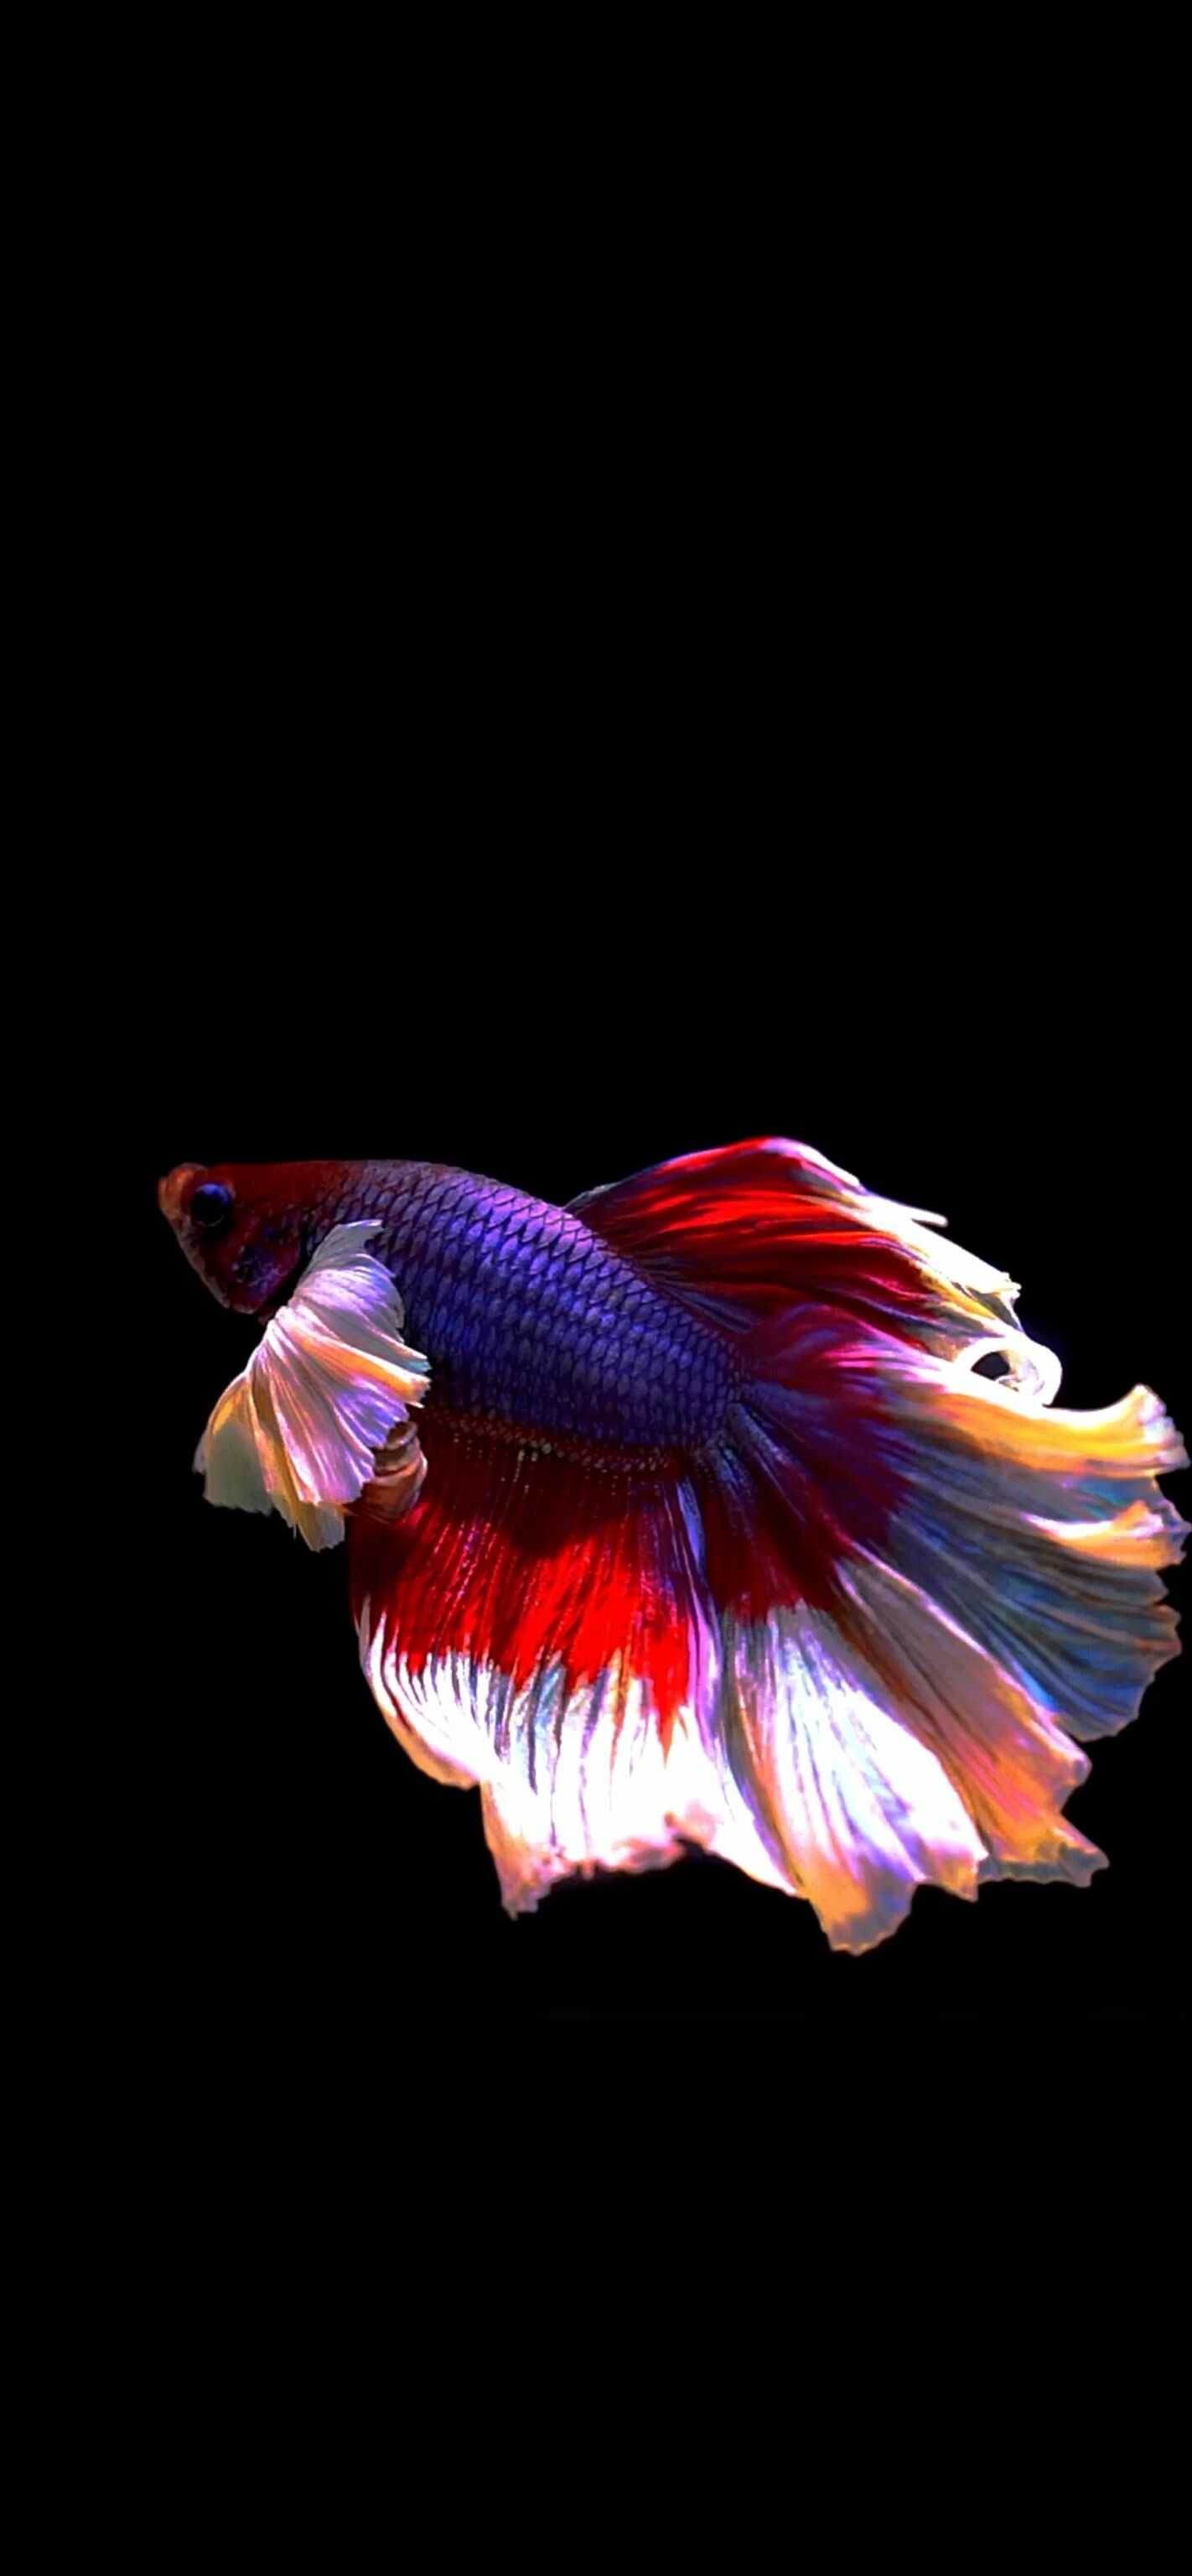 Fish live wallpaper 4k, Mobile wallpapers, High-quality images, For Android and iOS, 1430x3080 HD Phone